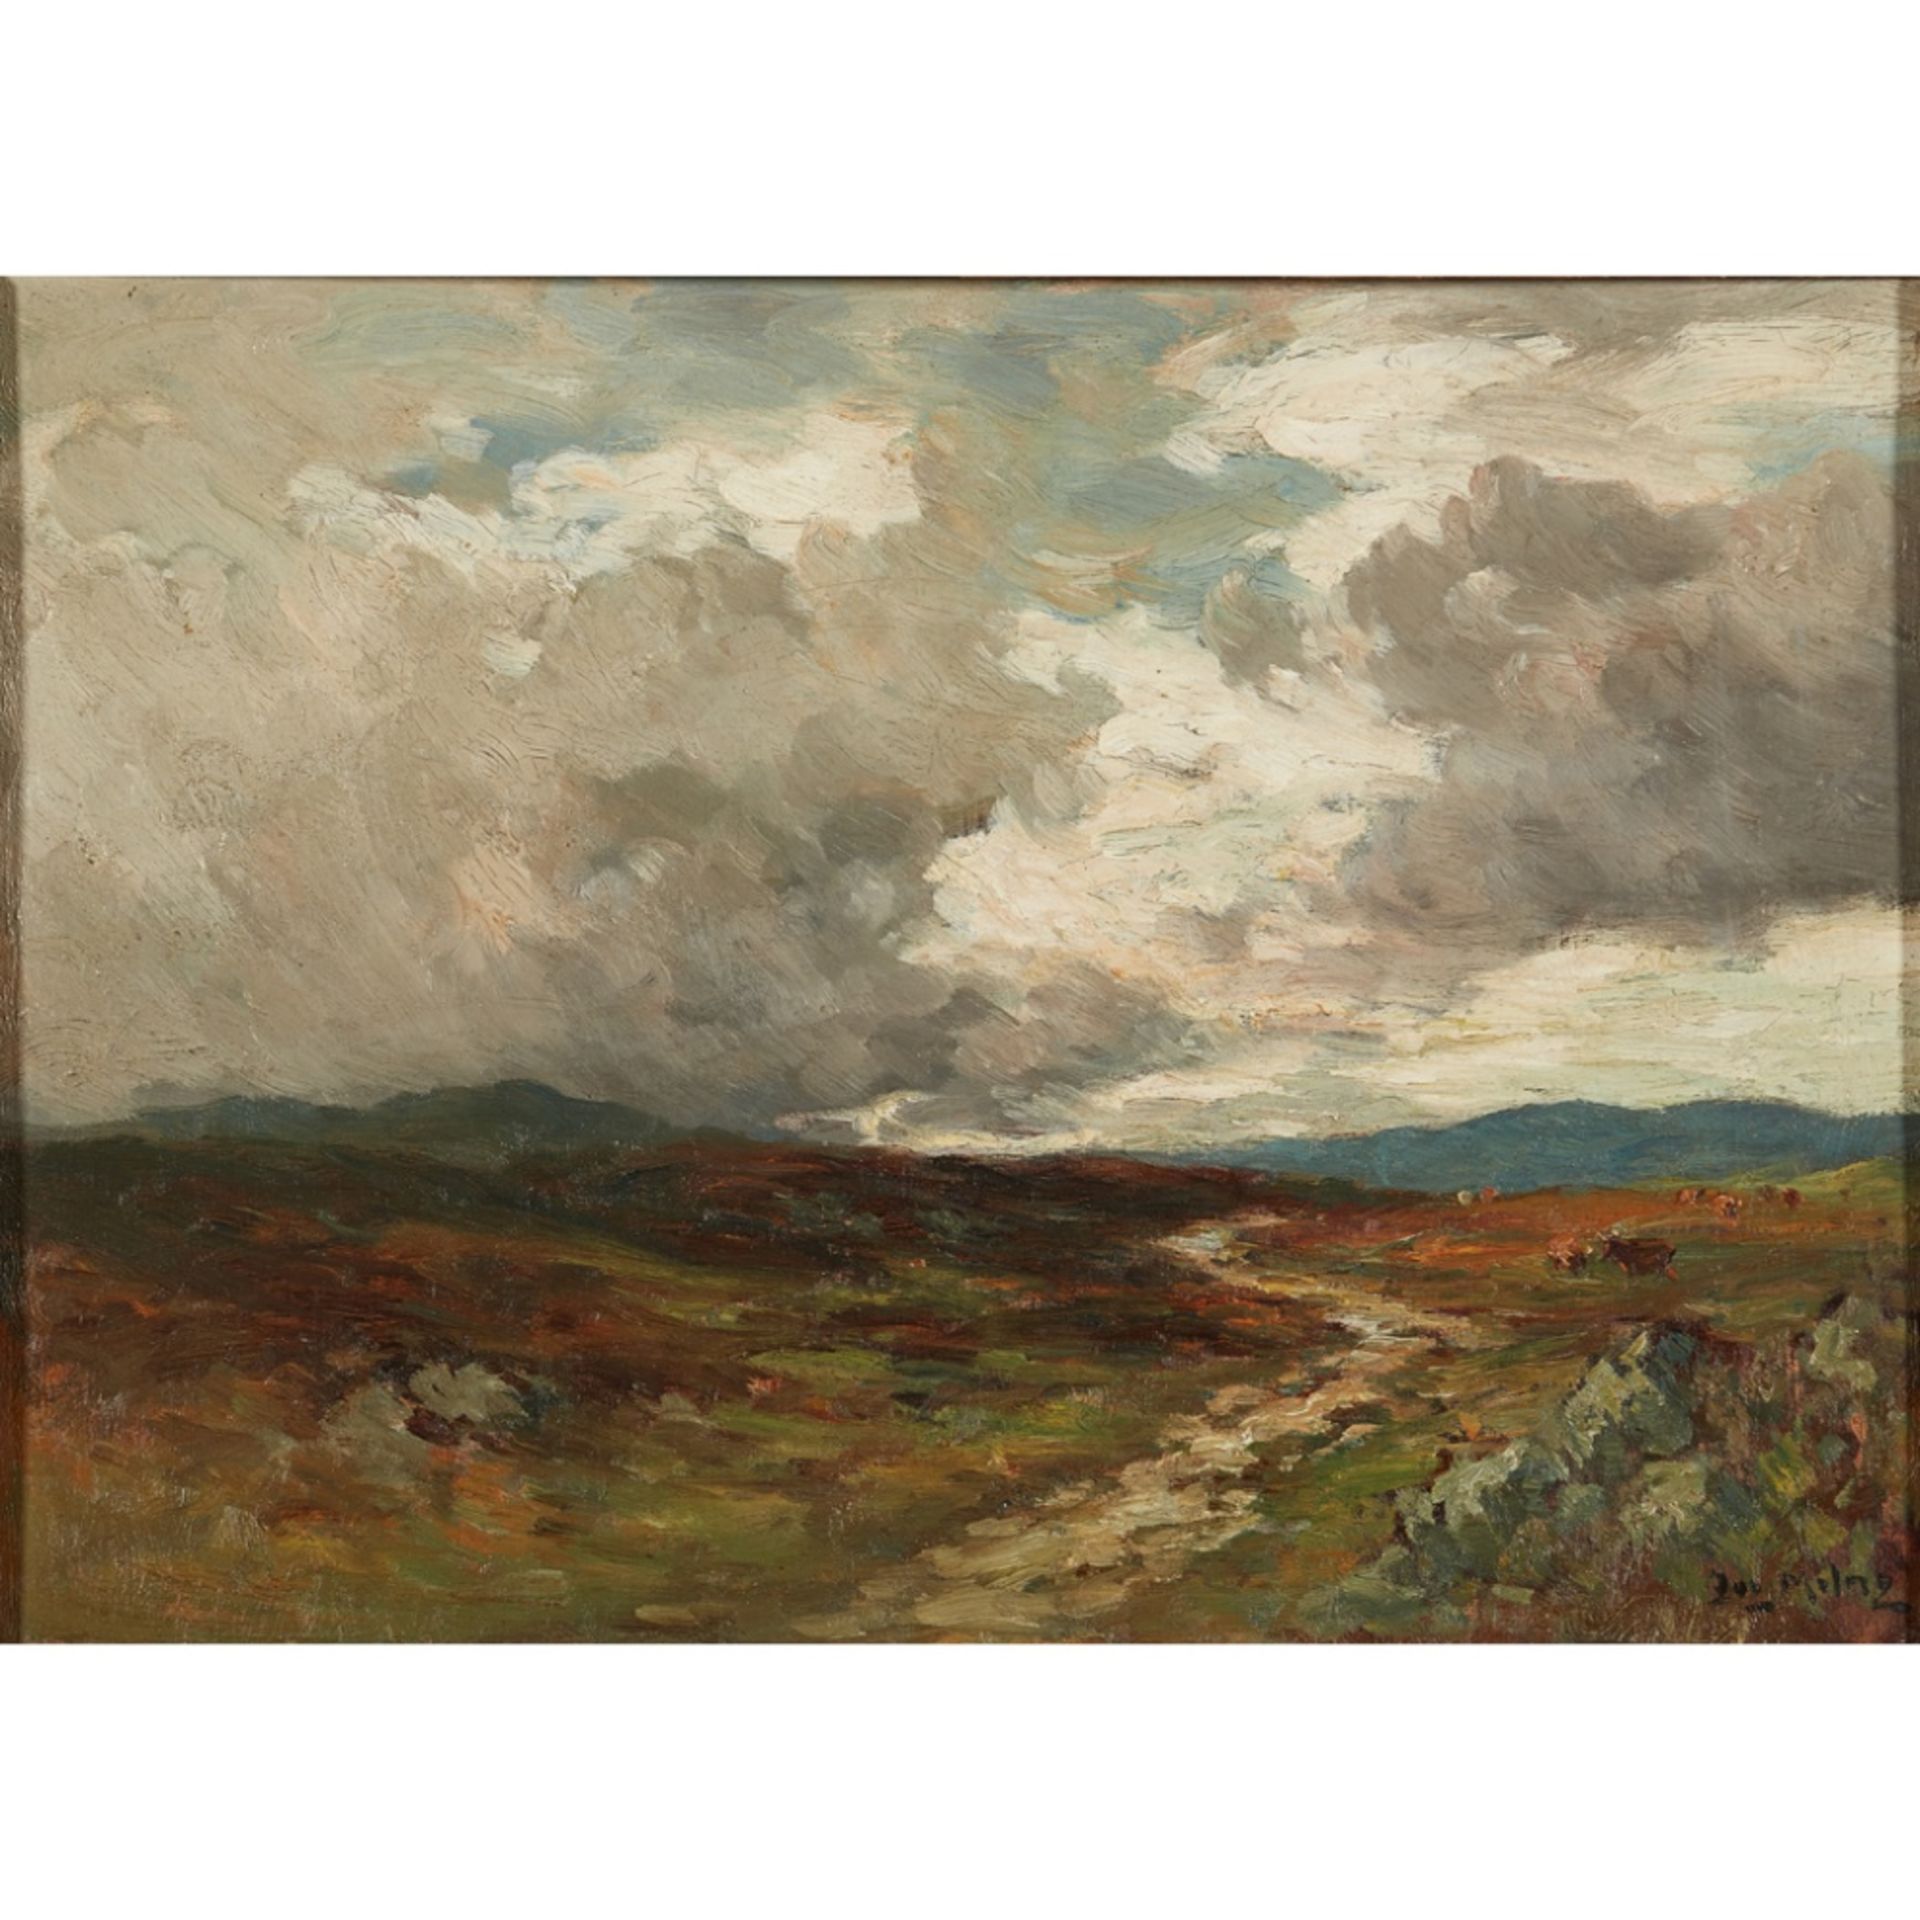 JOSEPH MILNE (SCOTTISH 1857-1911)STORM CLOUDS OVER THE HILLS Signed, oil on board31.5cm x 44.5cm (